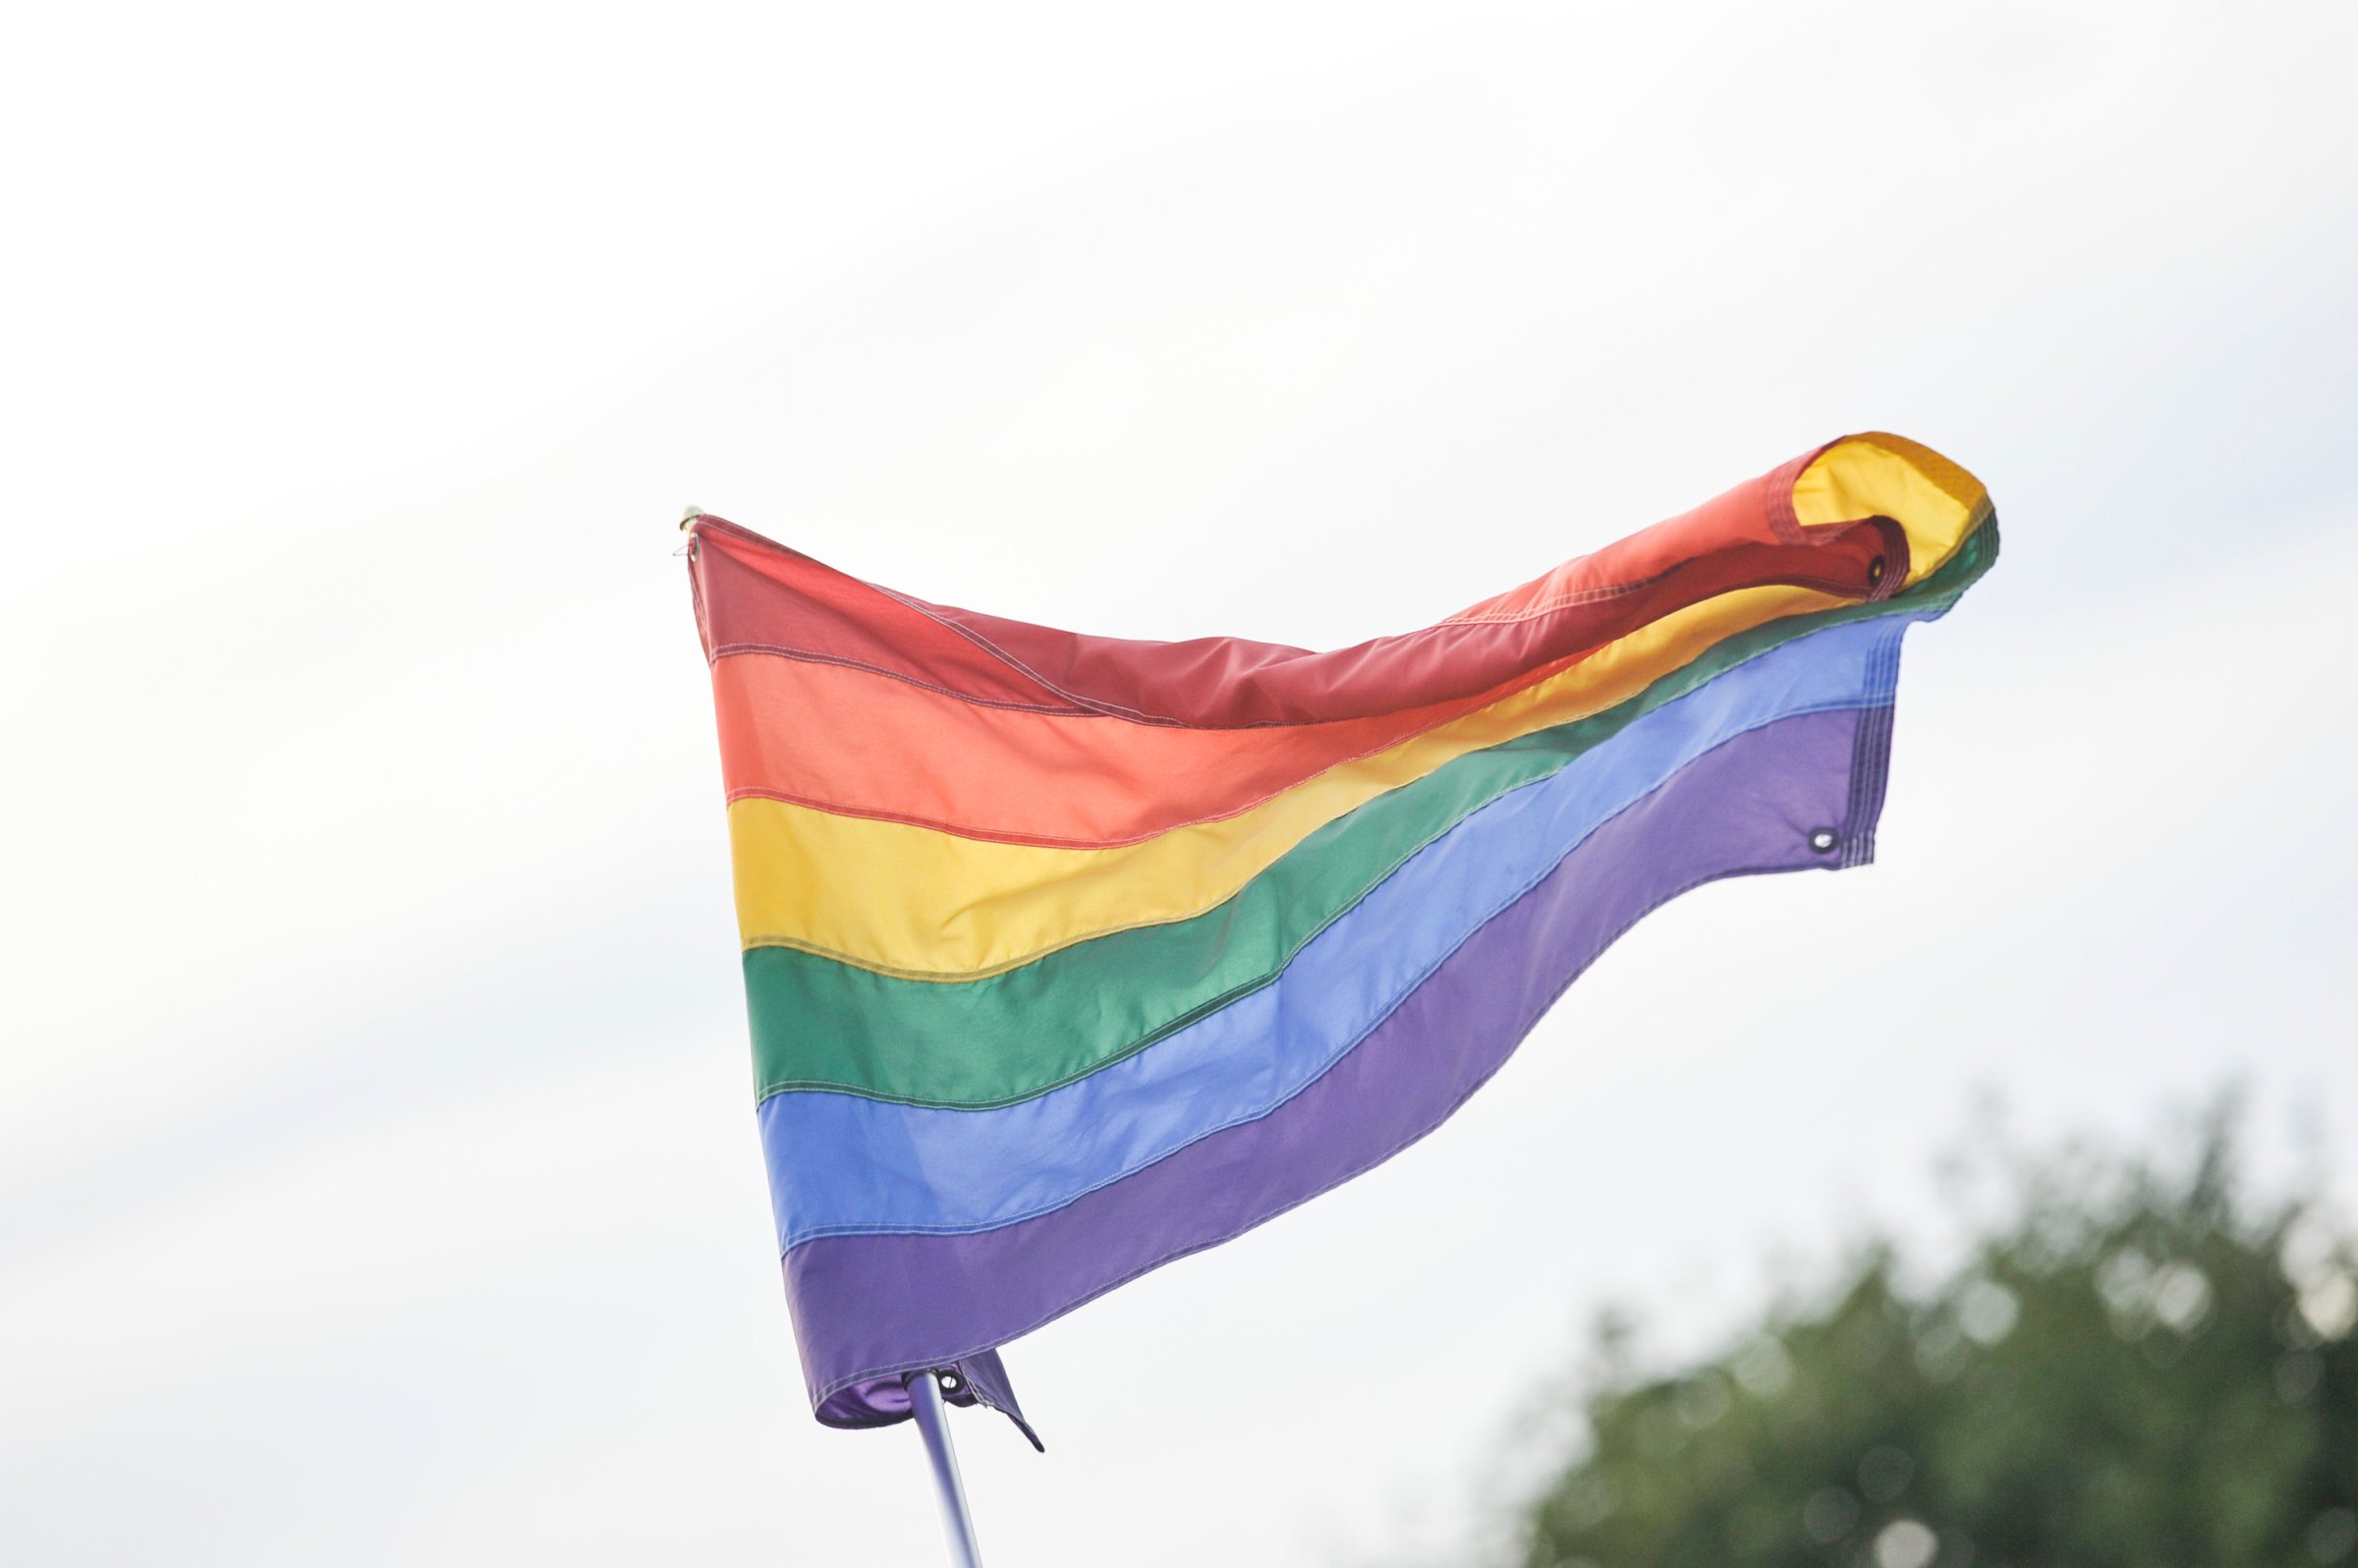 The rainbow flag, commonly the gay pride flag and LGBT pride flag, is seen during the 2016 Electric Zoo Festival at Randall's Island on September 2, 2016 in New York City.